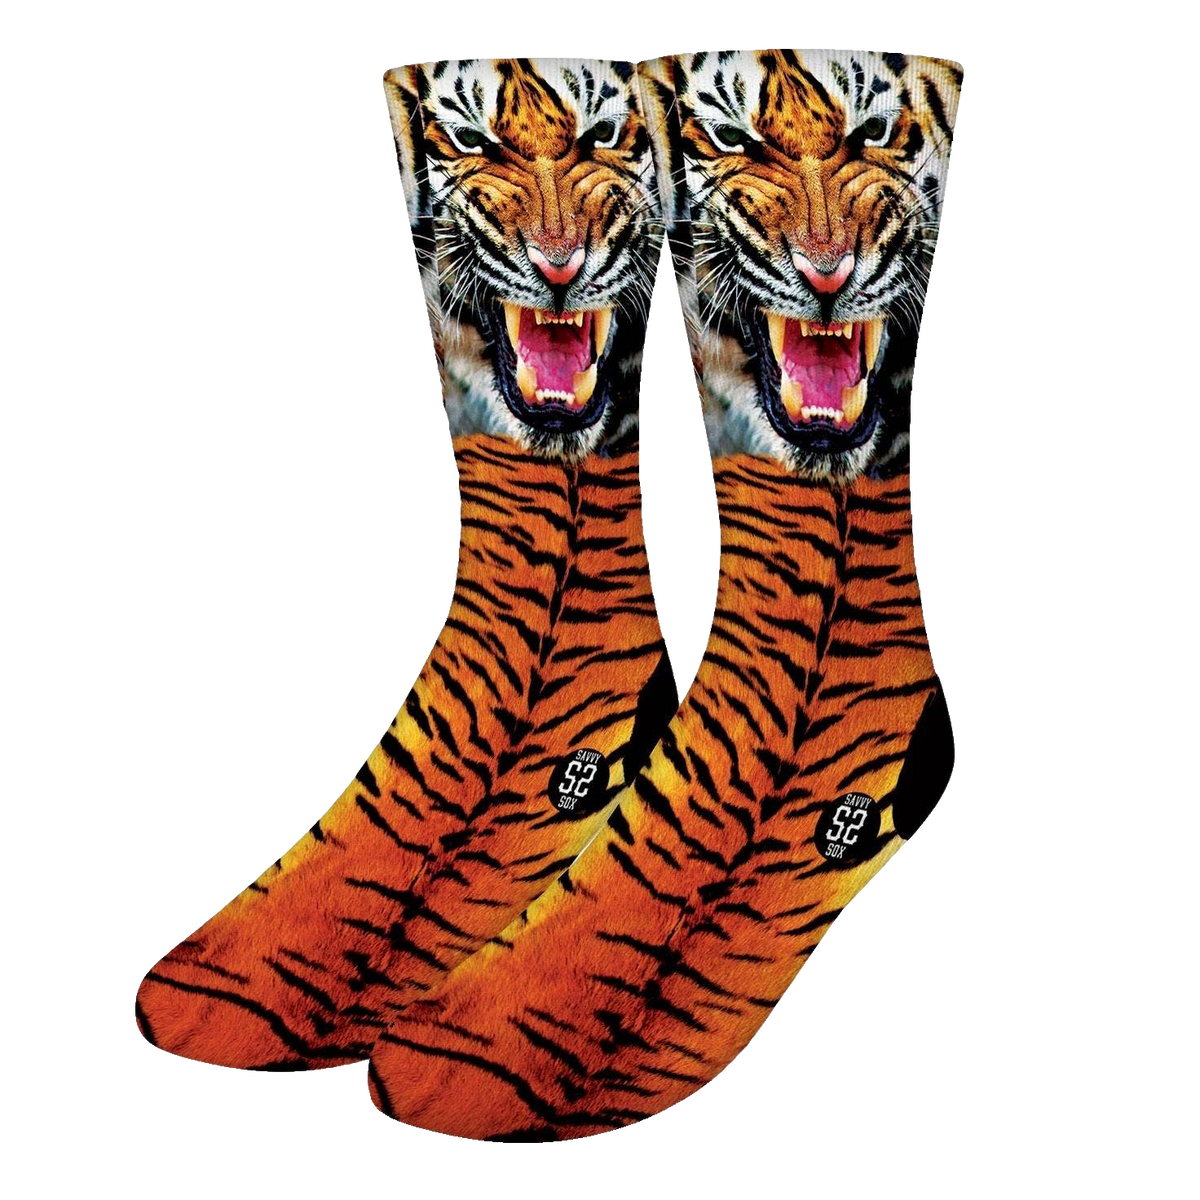 Scowling Tiger Face Socks - 1 Pair